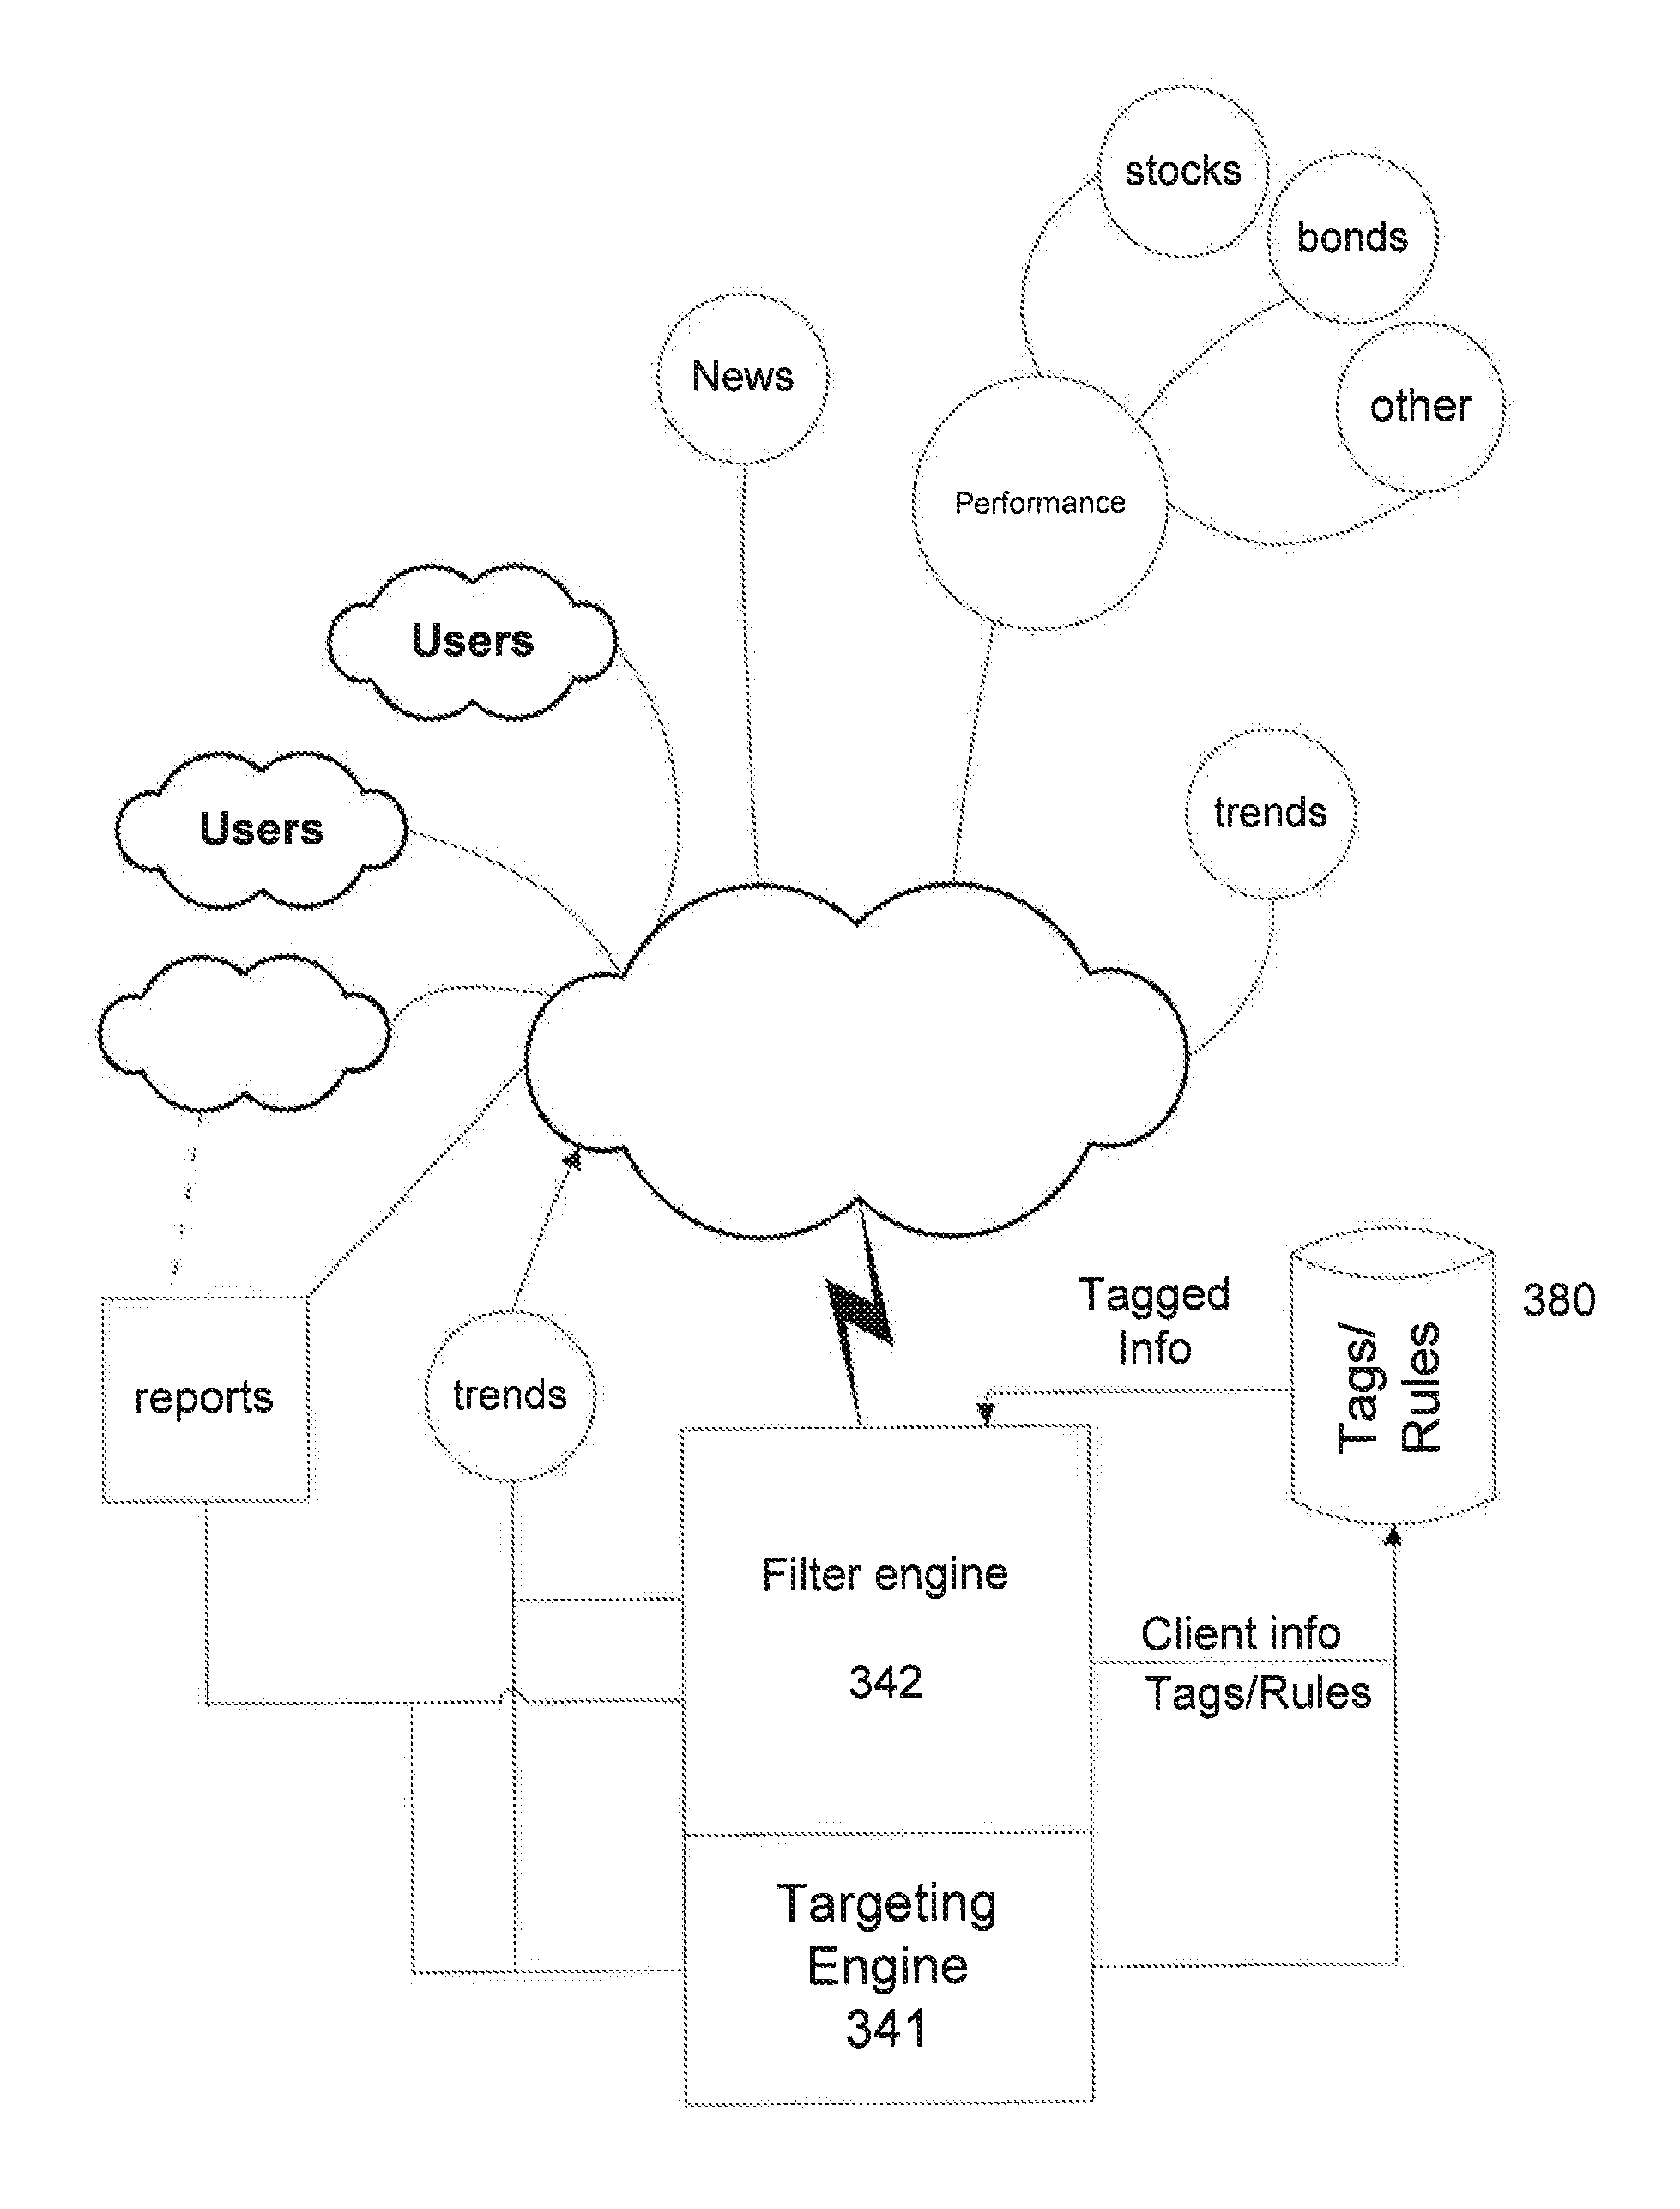 Computer-based system for use in providing advisory services